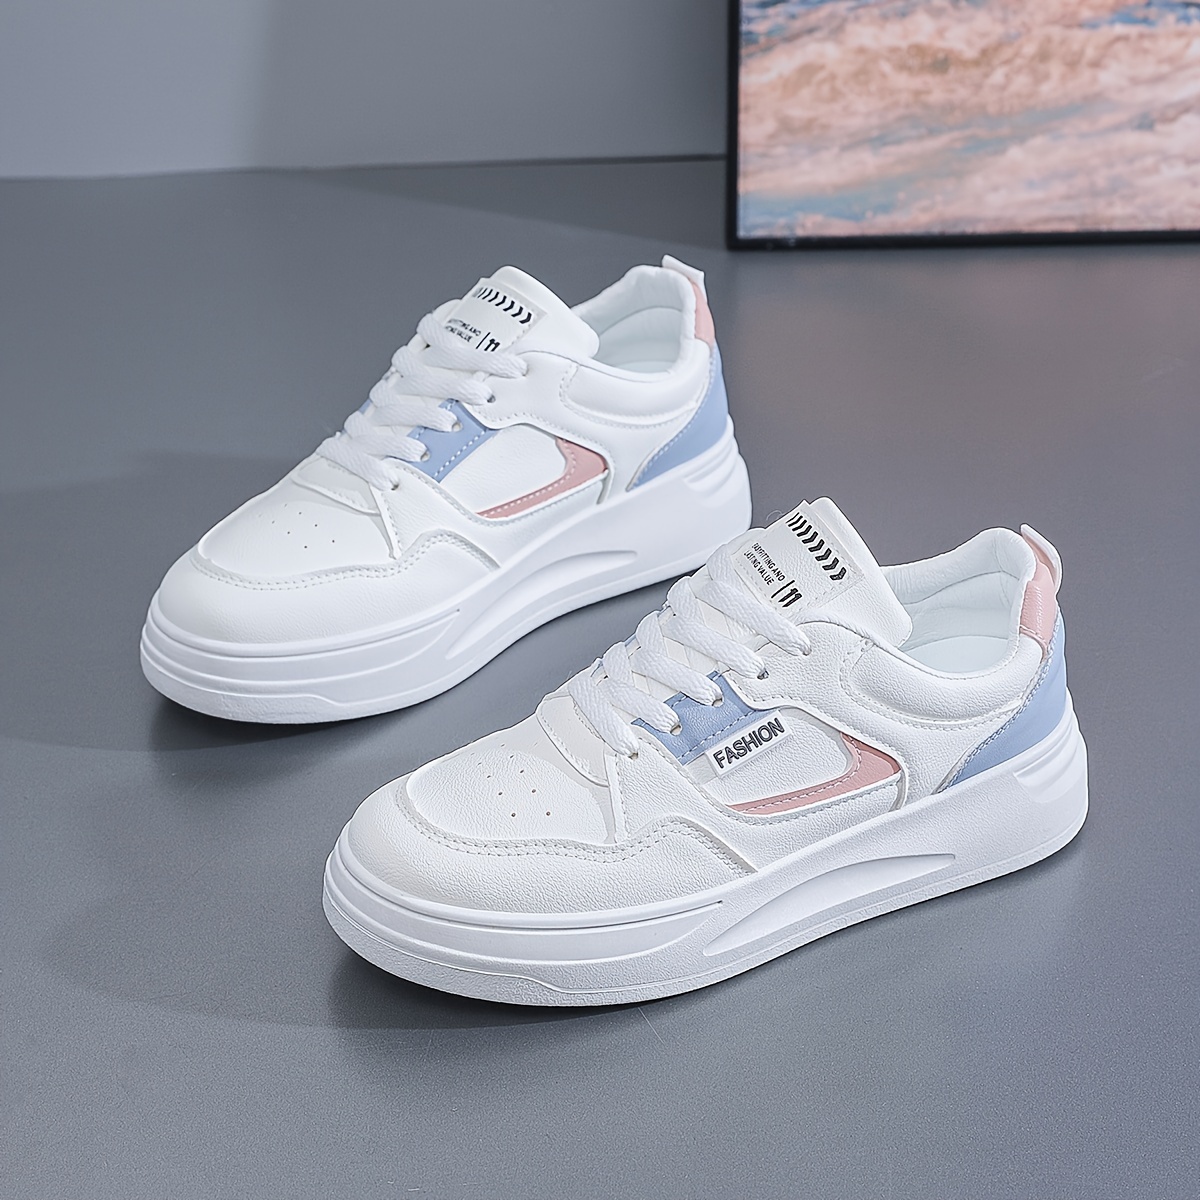 

Women's Colorblock Casual Sneakers, Lace Up Platform Soft Sole Walking Skate Shoes, Low-top Comfort Preppy Trainers